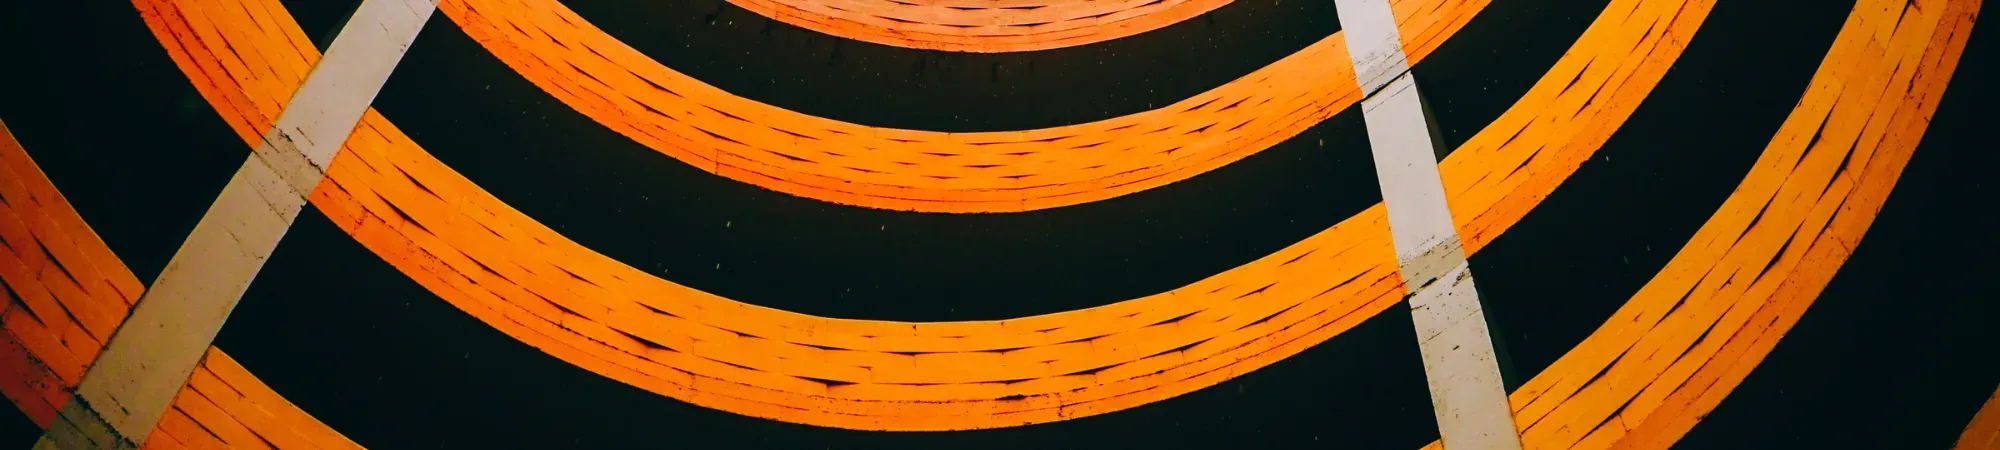 A series of orange bands rising up